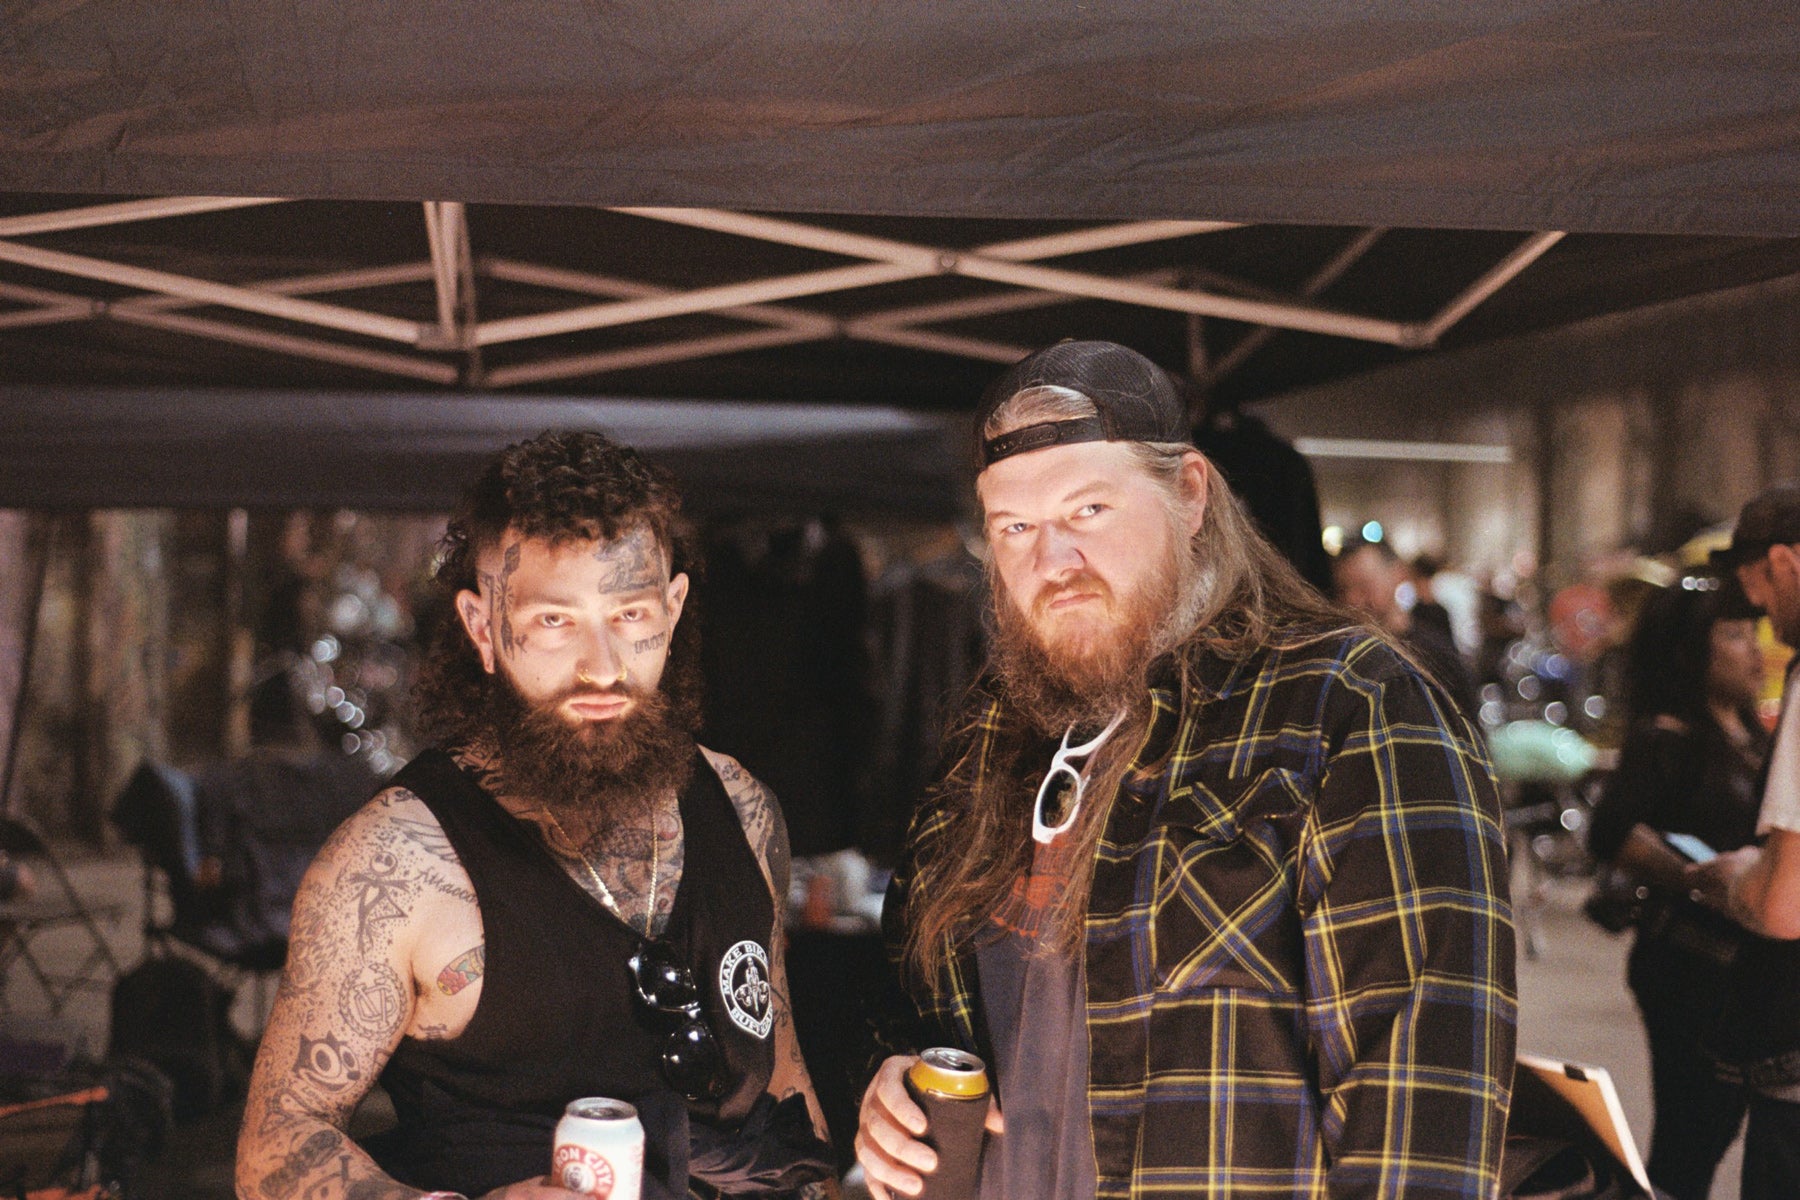 Glory Daze Motorcycle Show Pittsburgh 35mm film photos